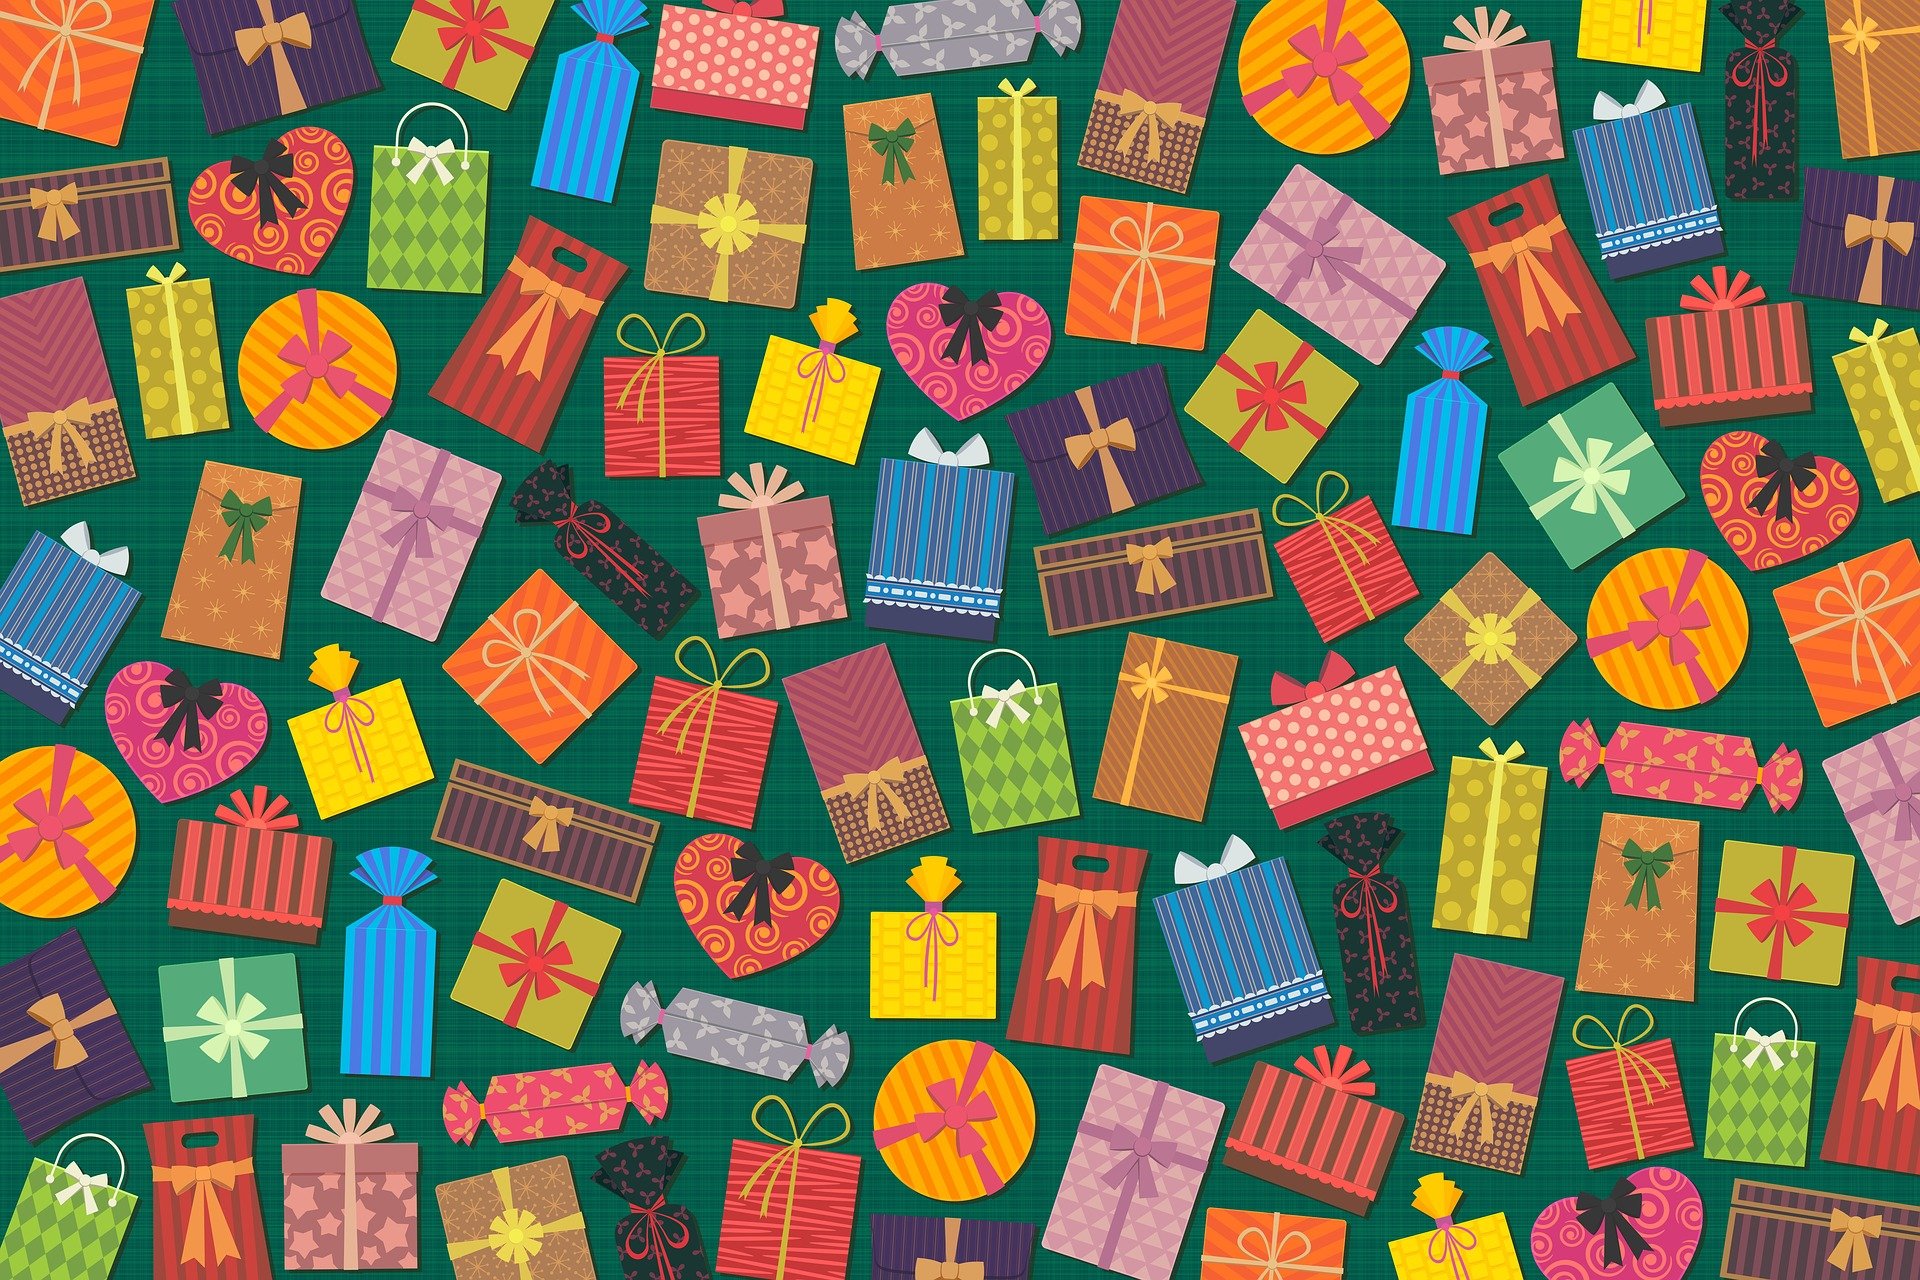 Image of wrapped Christmas gifts